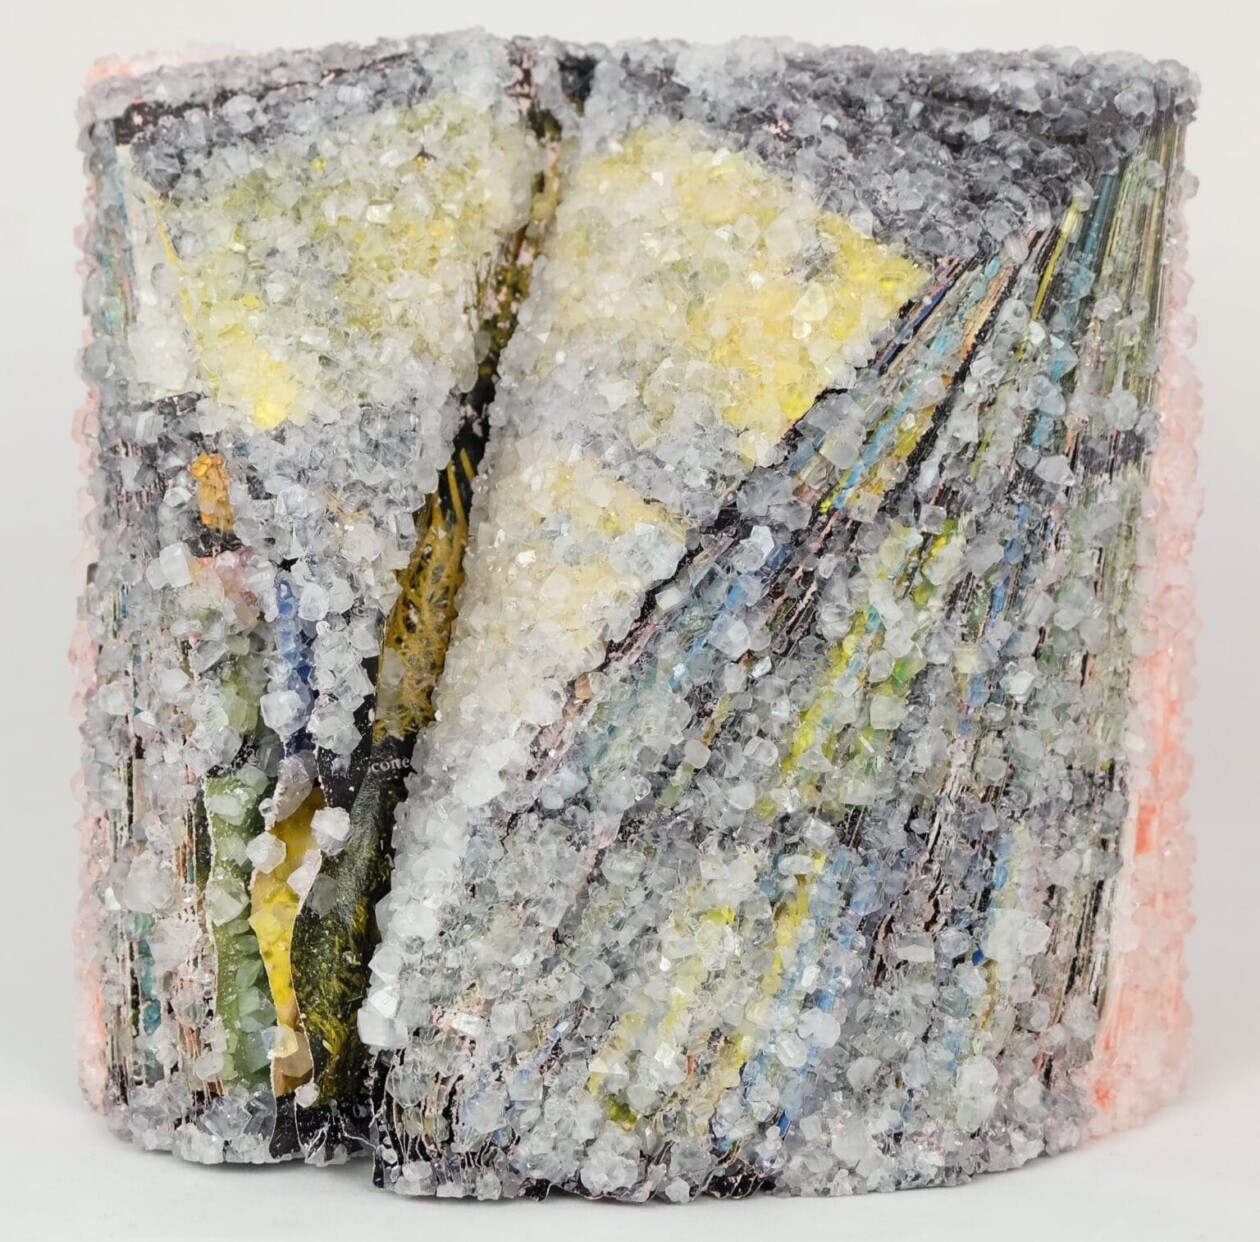 Crystallized Books, A Sculptures Series By Alexis Arnold (24)